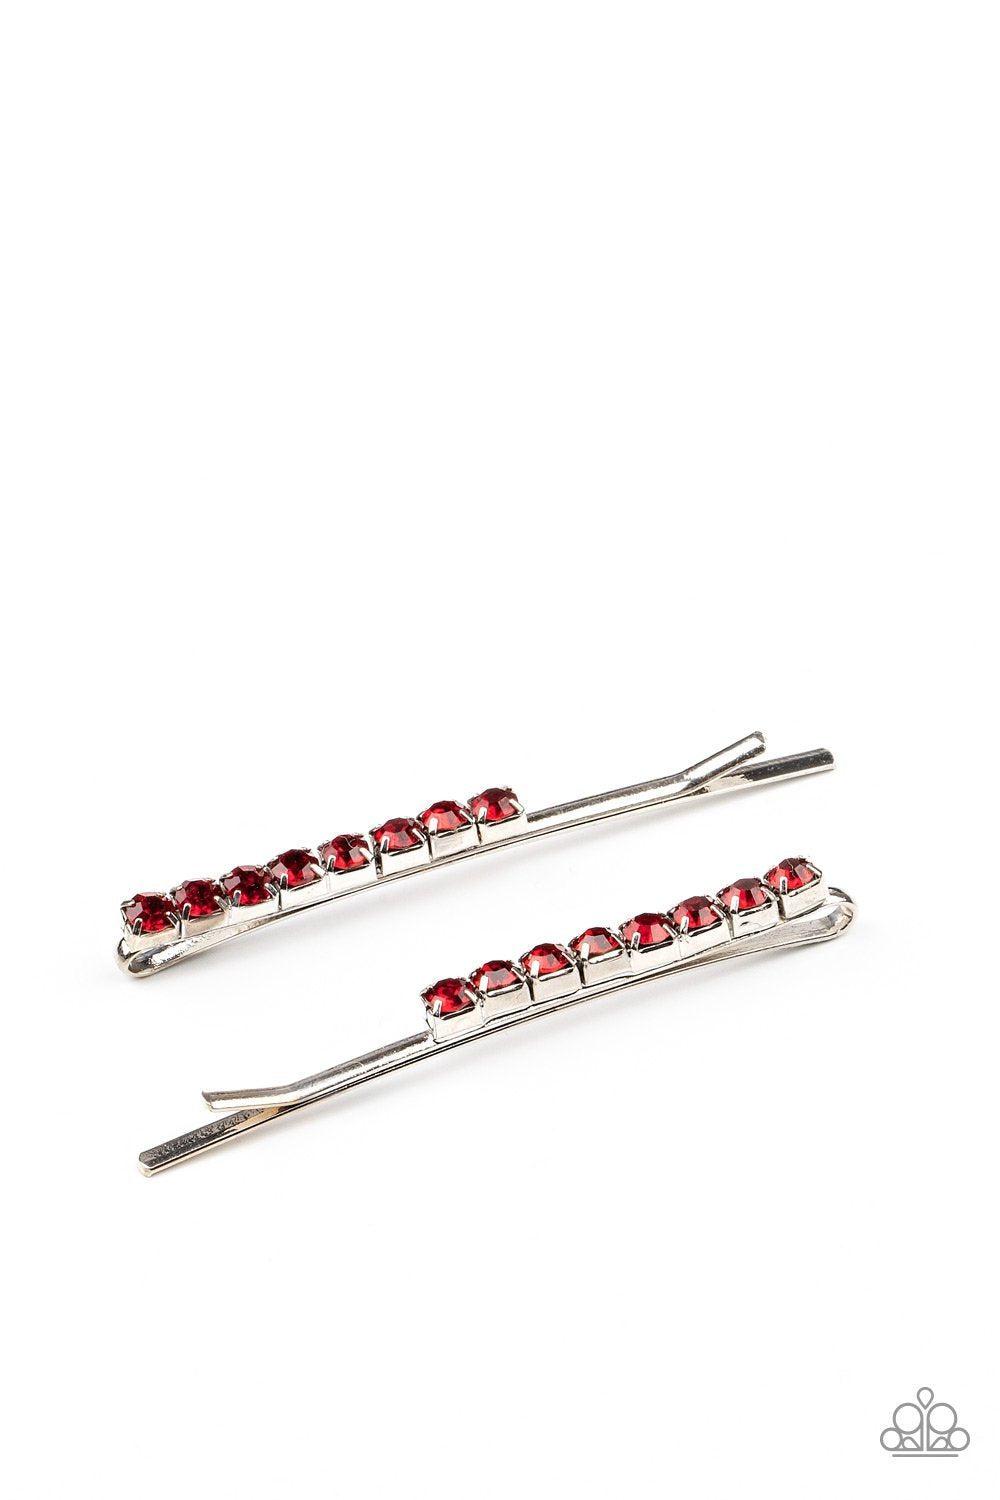 Satisfactory Sparkle Red Rhinestone Hair Pins - Paparazzi Accessories - model -CarasShop.com - $5 Jewelry by Cara Jewels